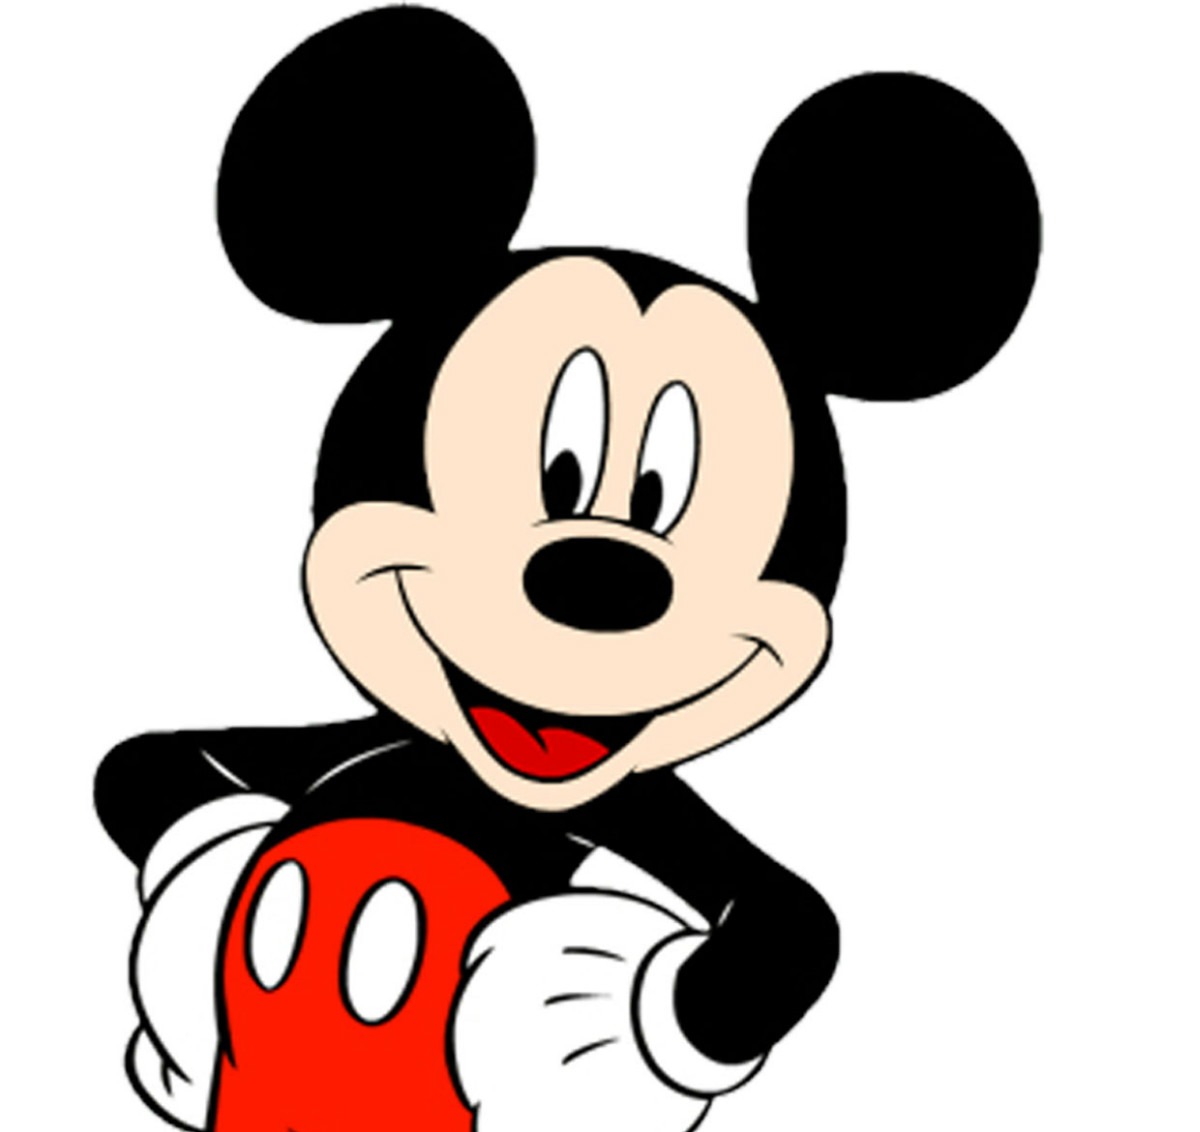 Mickey mouse cartoon pictures free kidsloring europe travel jpg